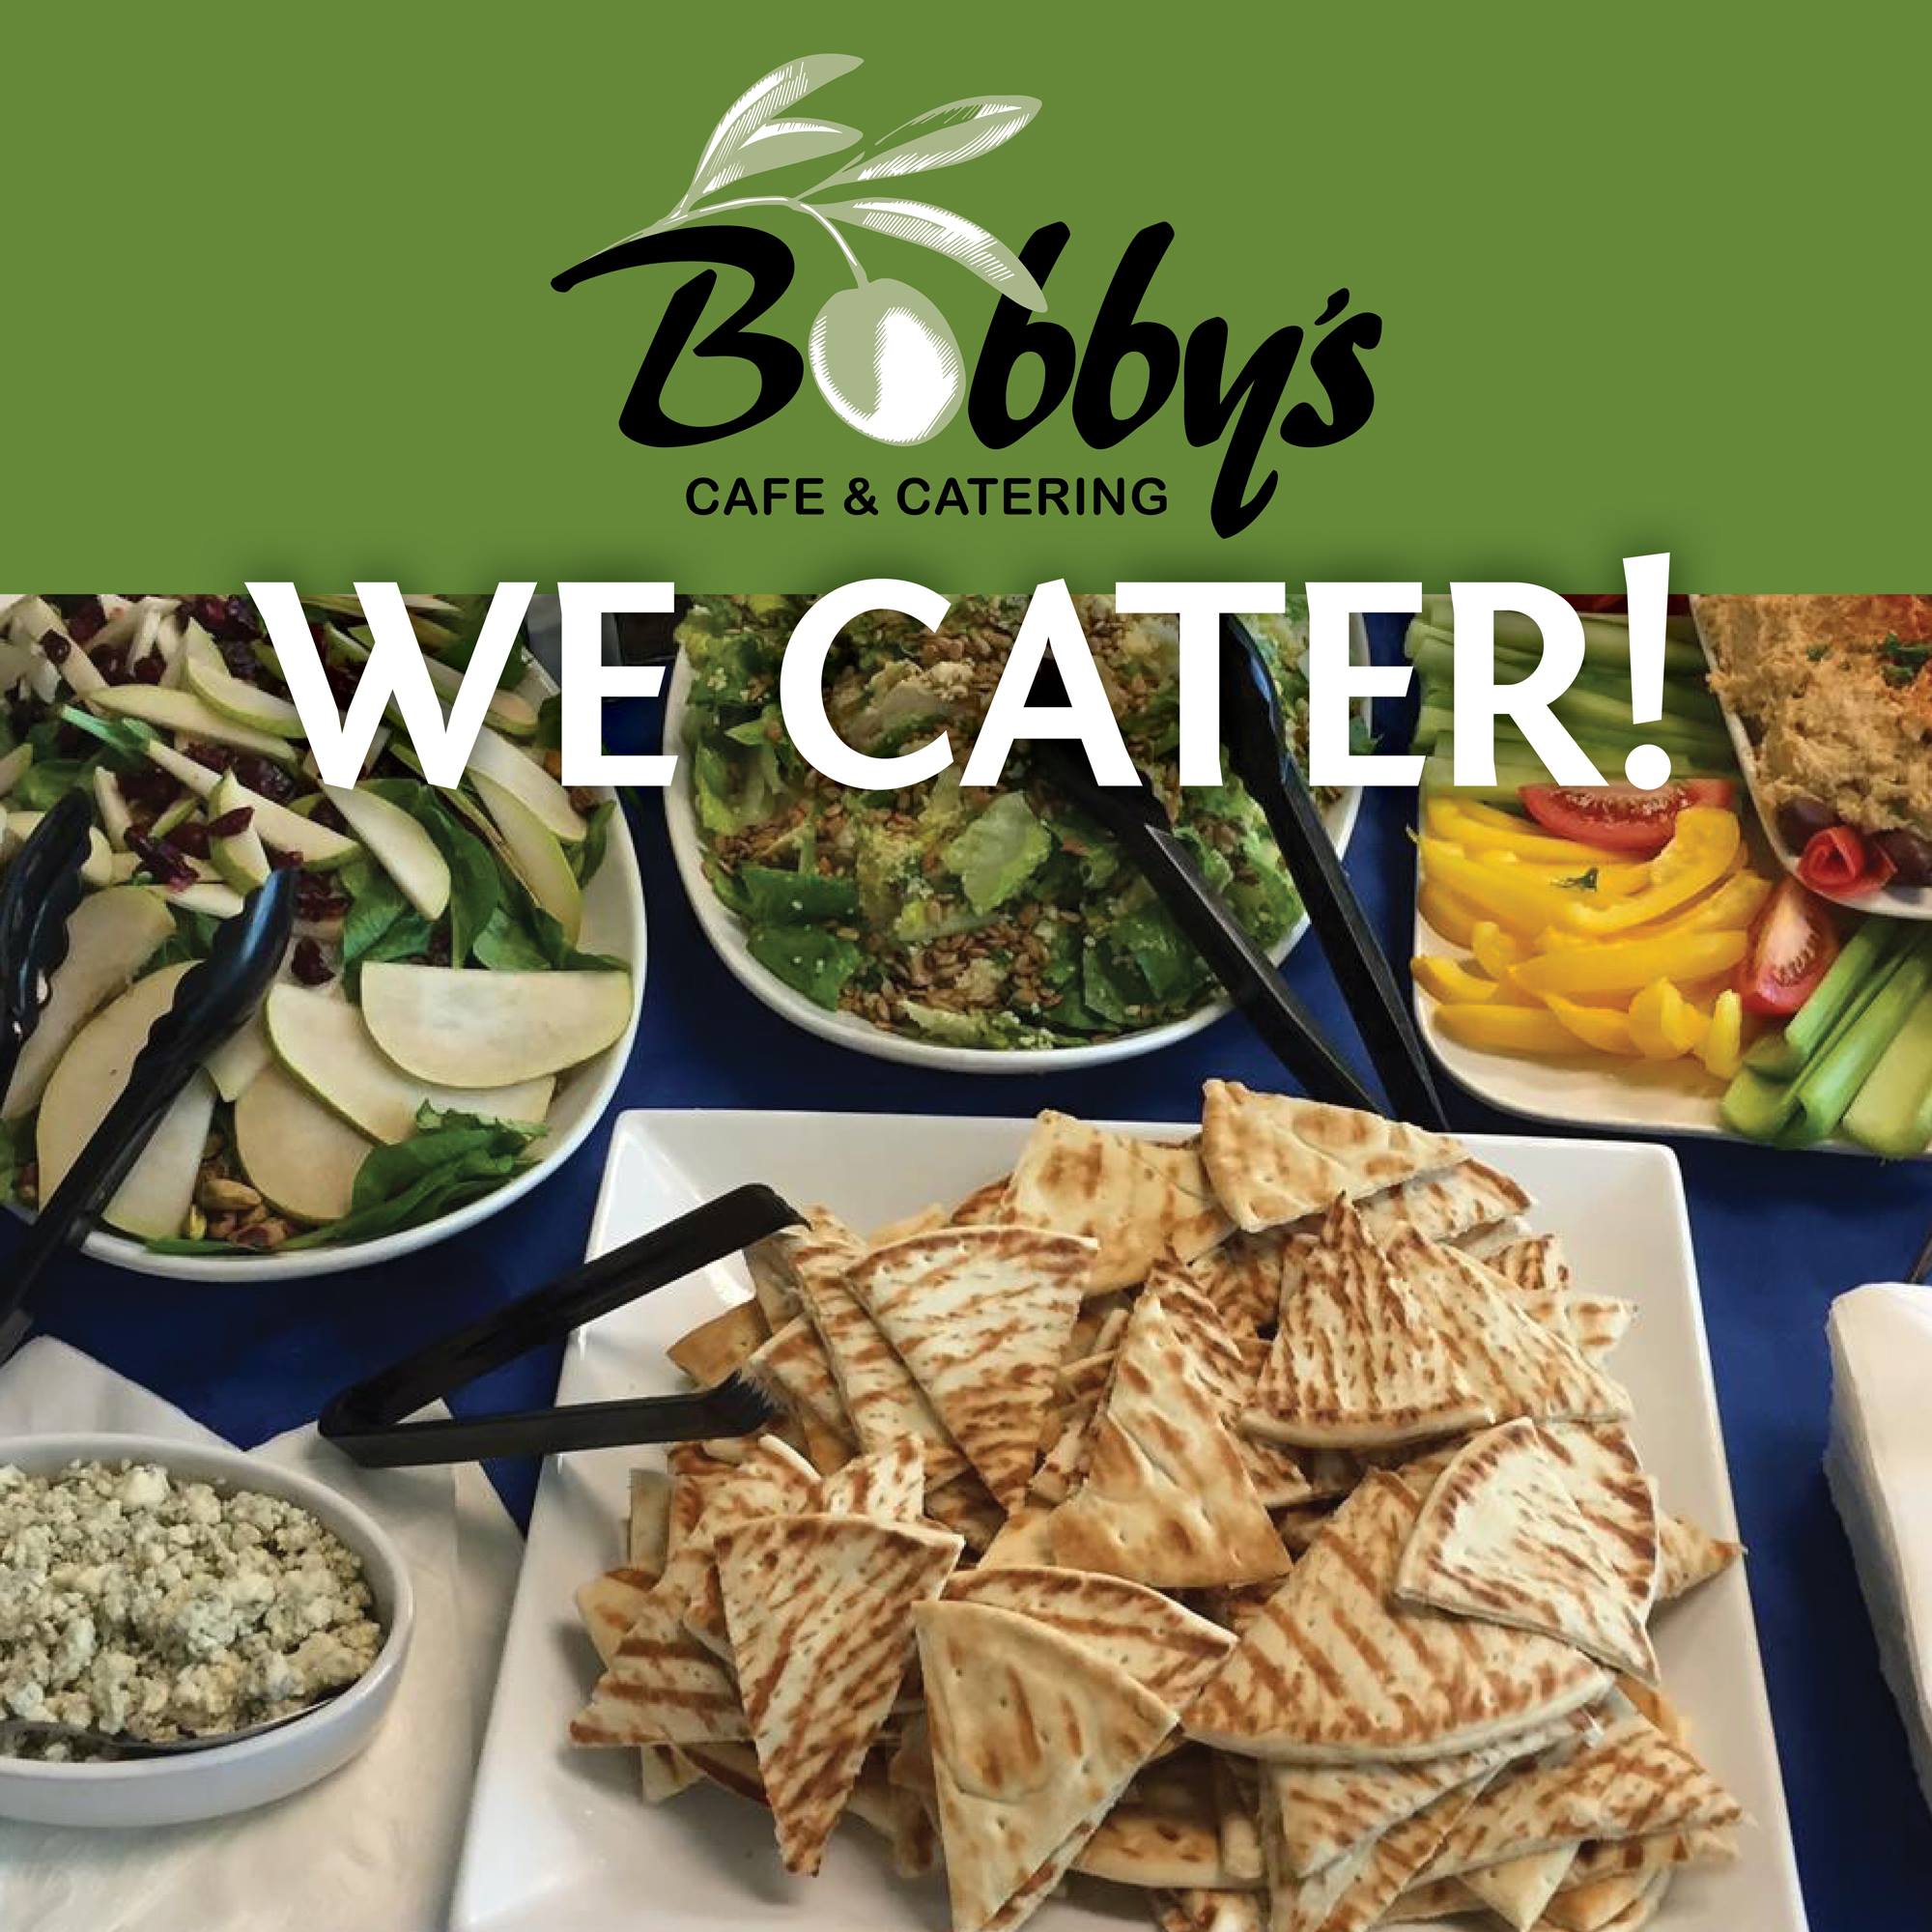 Bobby's Cafe & Catering